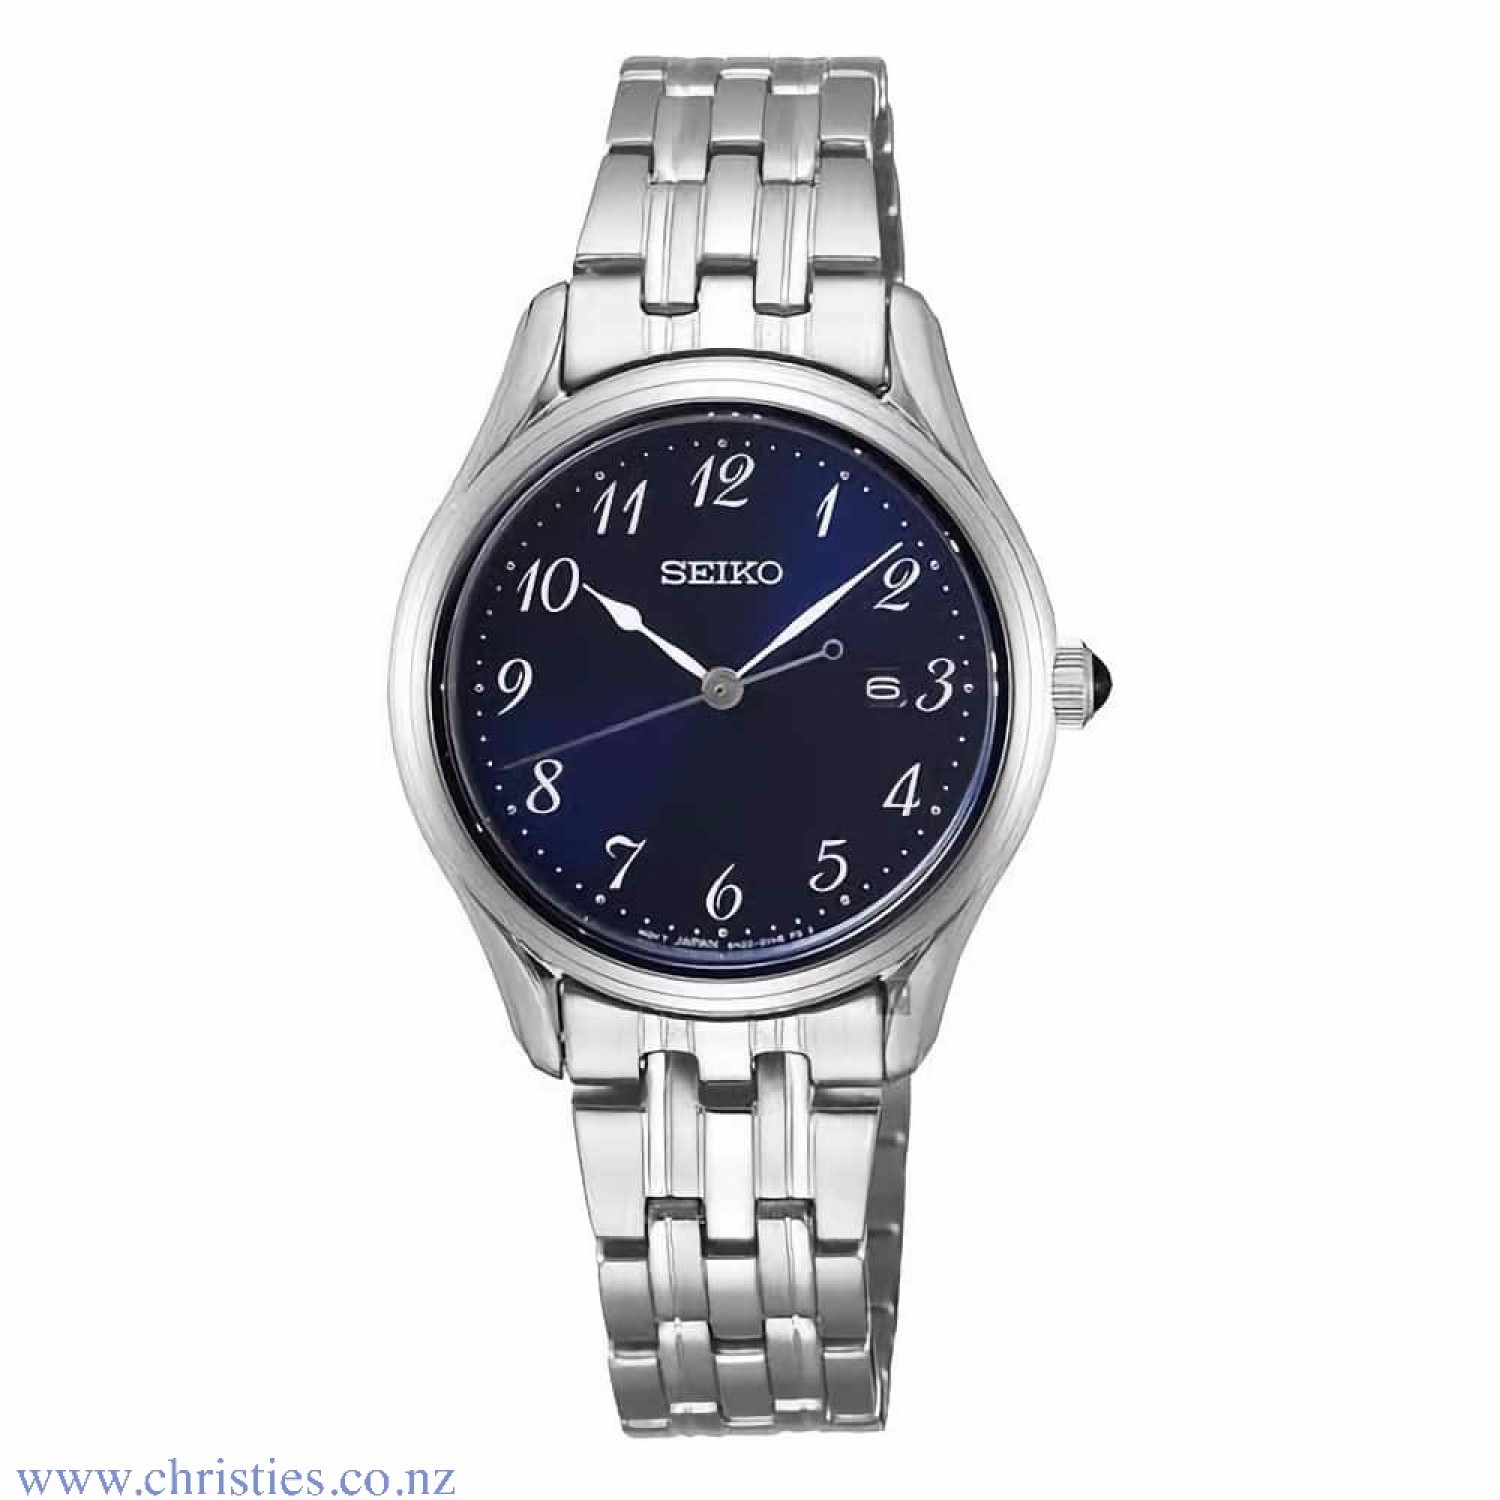 SUR641P SEIKO Ladies Quartz Watch. Ladies Seiko SUR641P watch with Blue Dial and stainless steel case and bracelet   Humm -Buy Little things up to $1000 and choose 10 weekly or 5 fortnightly payments with no interest. Late payment fee of $10 wi @christies